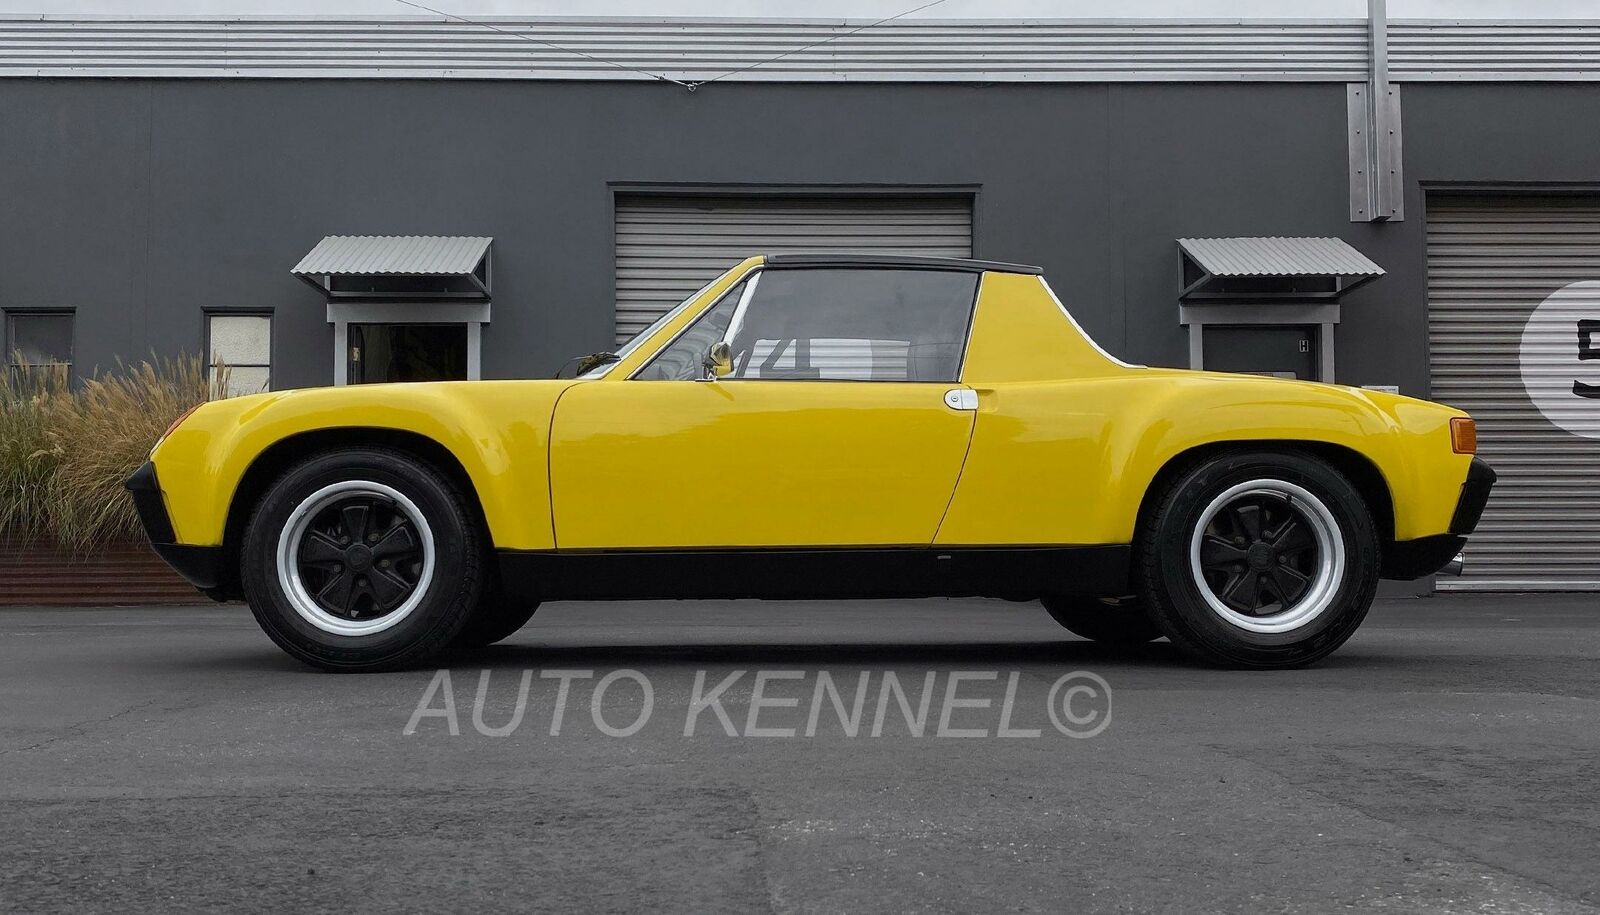 The 914 styling has worn well.